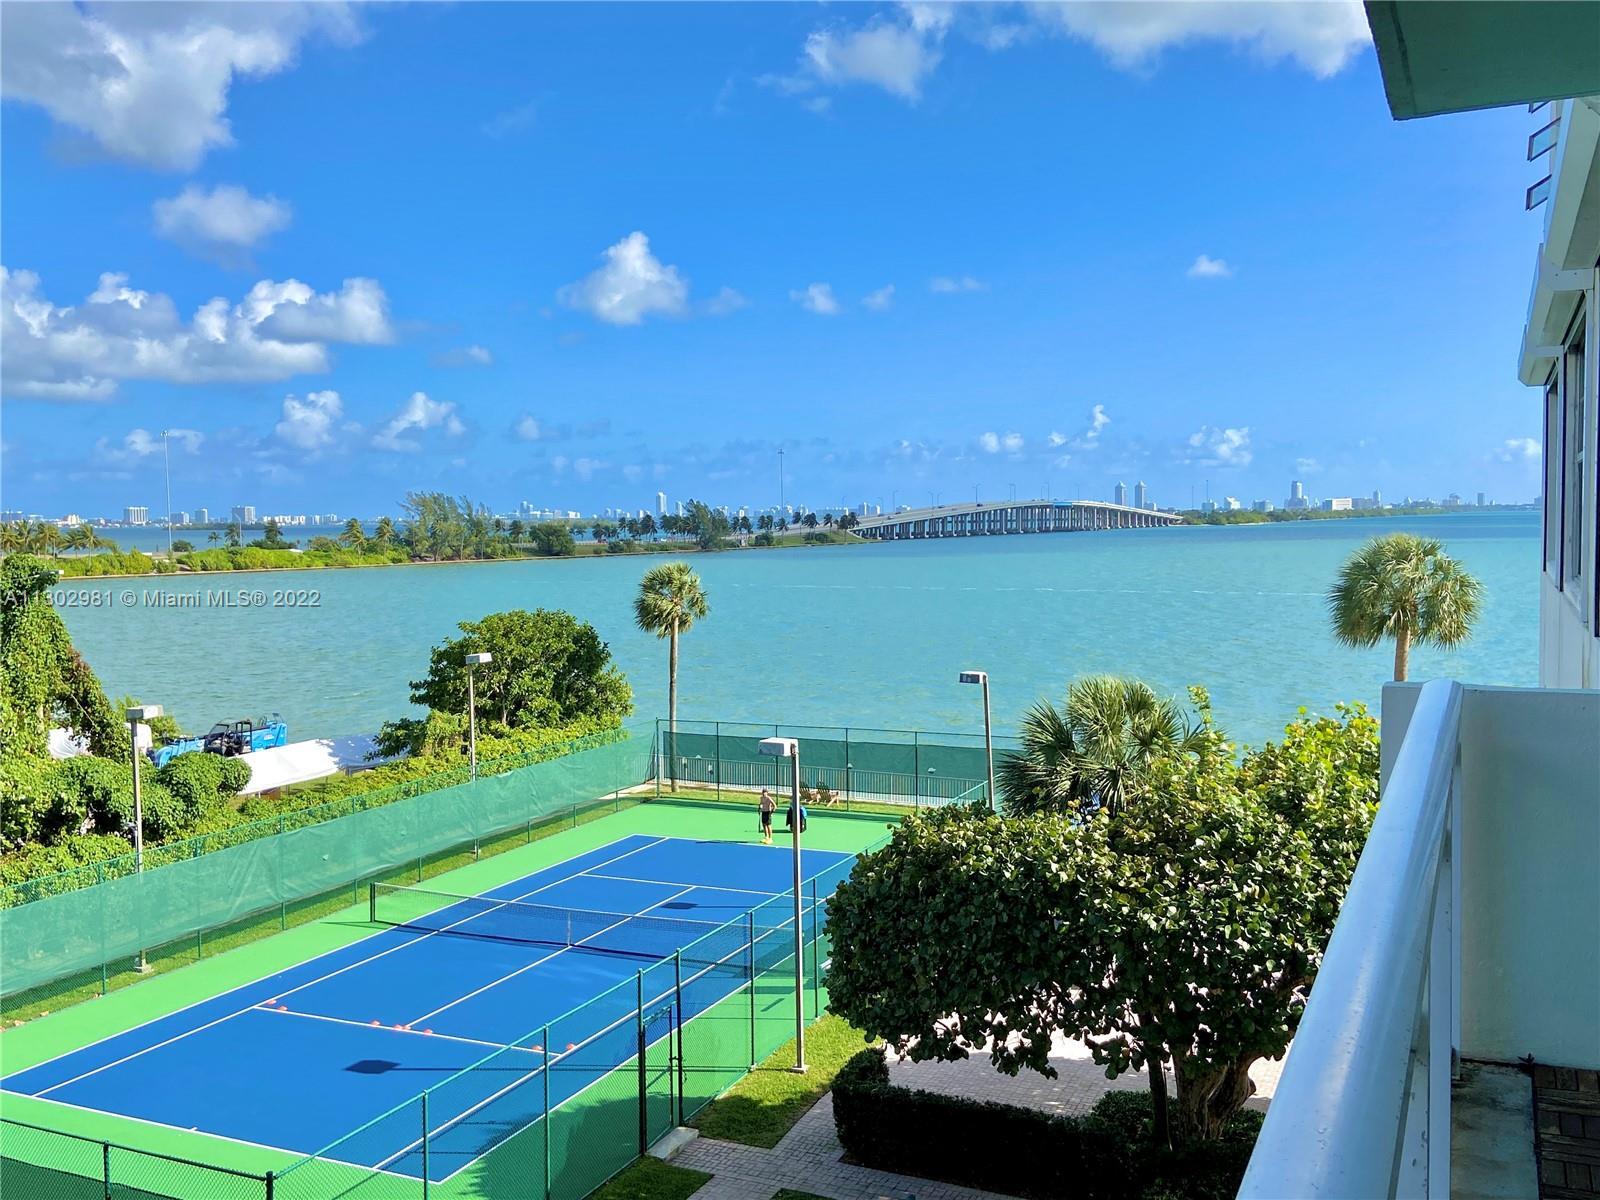 Stunning up graded large studio with amazing Biscayne Bay views. Building has great amenities, large